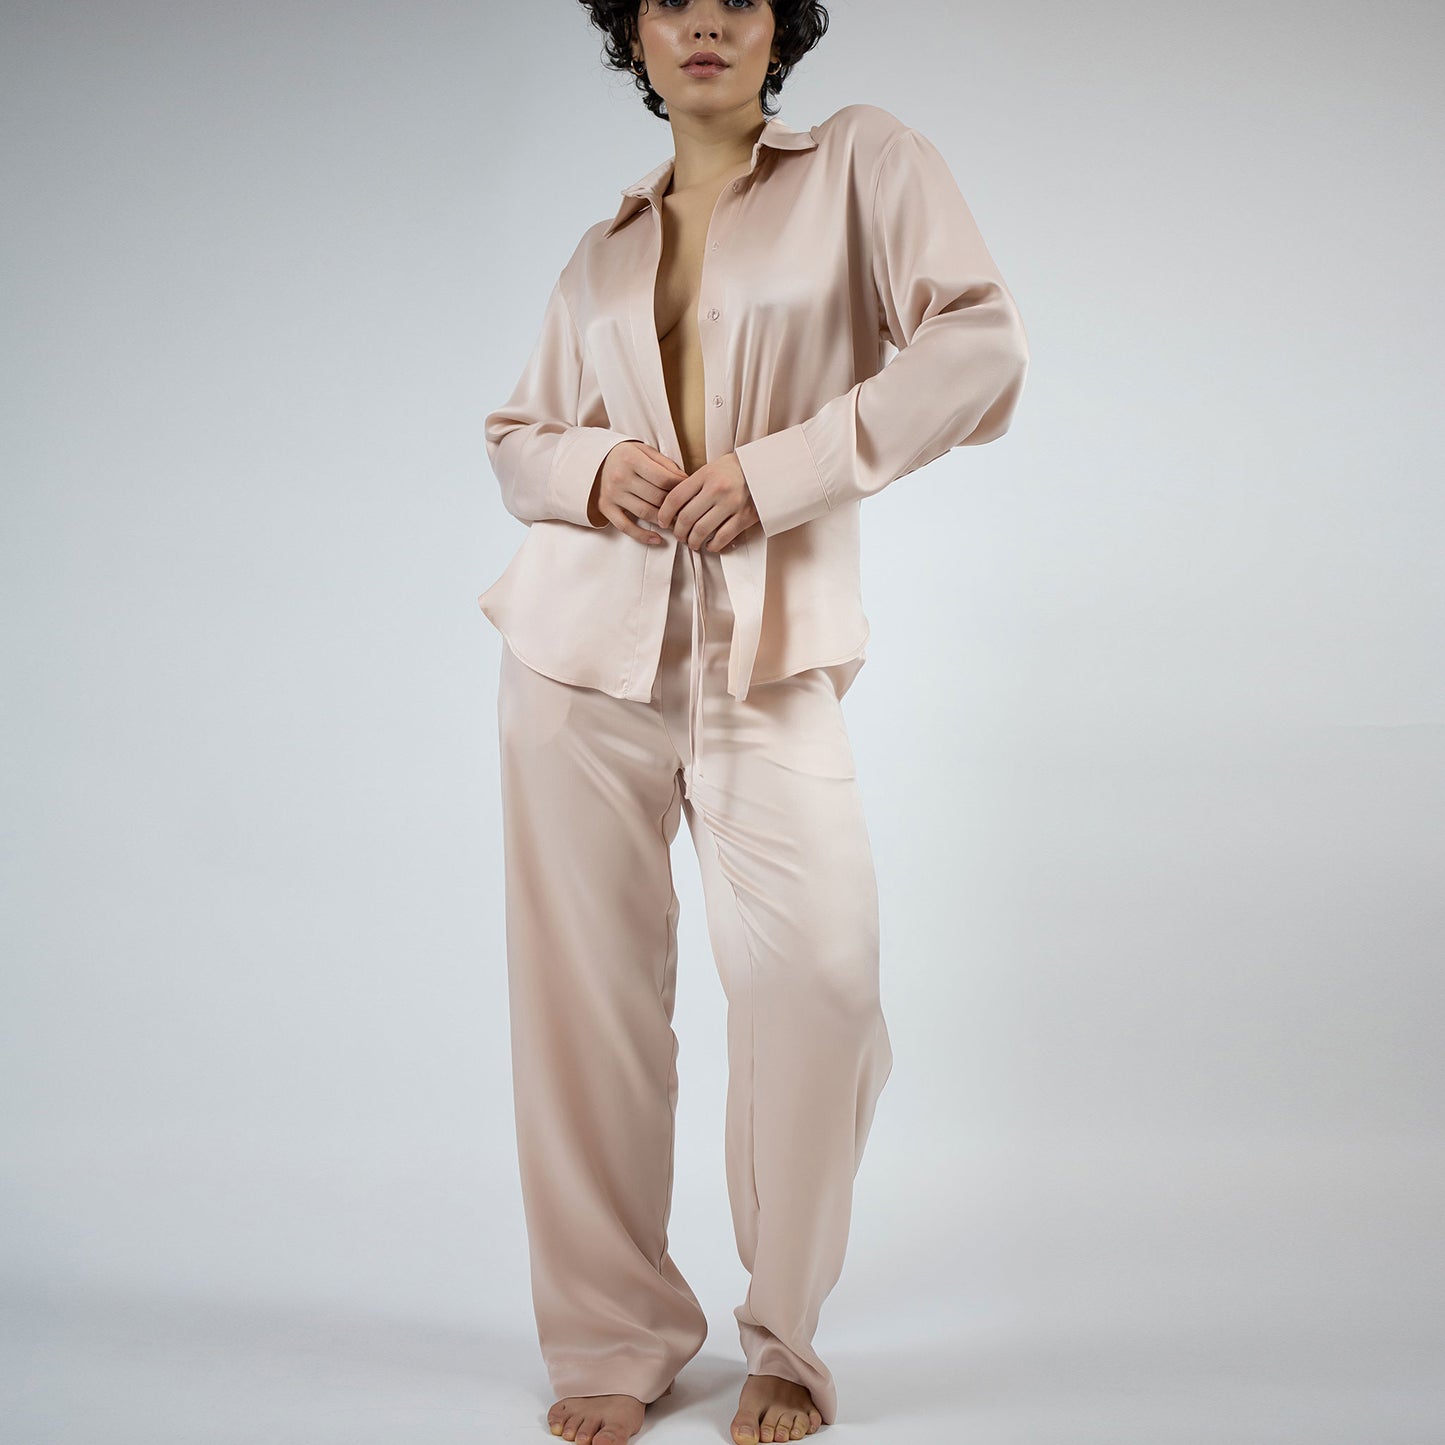 Pyjama shirt in Transcendent Pink made from 100% SILK